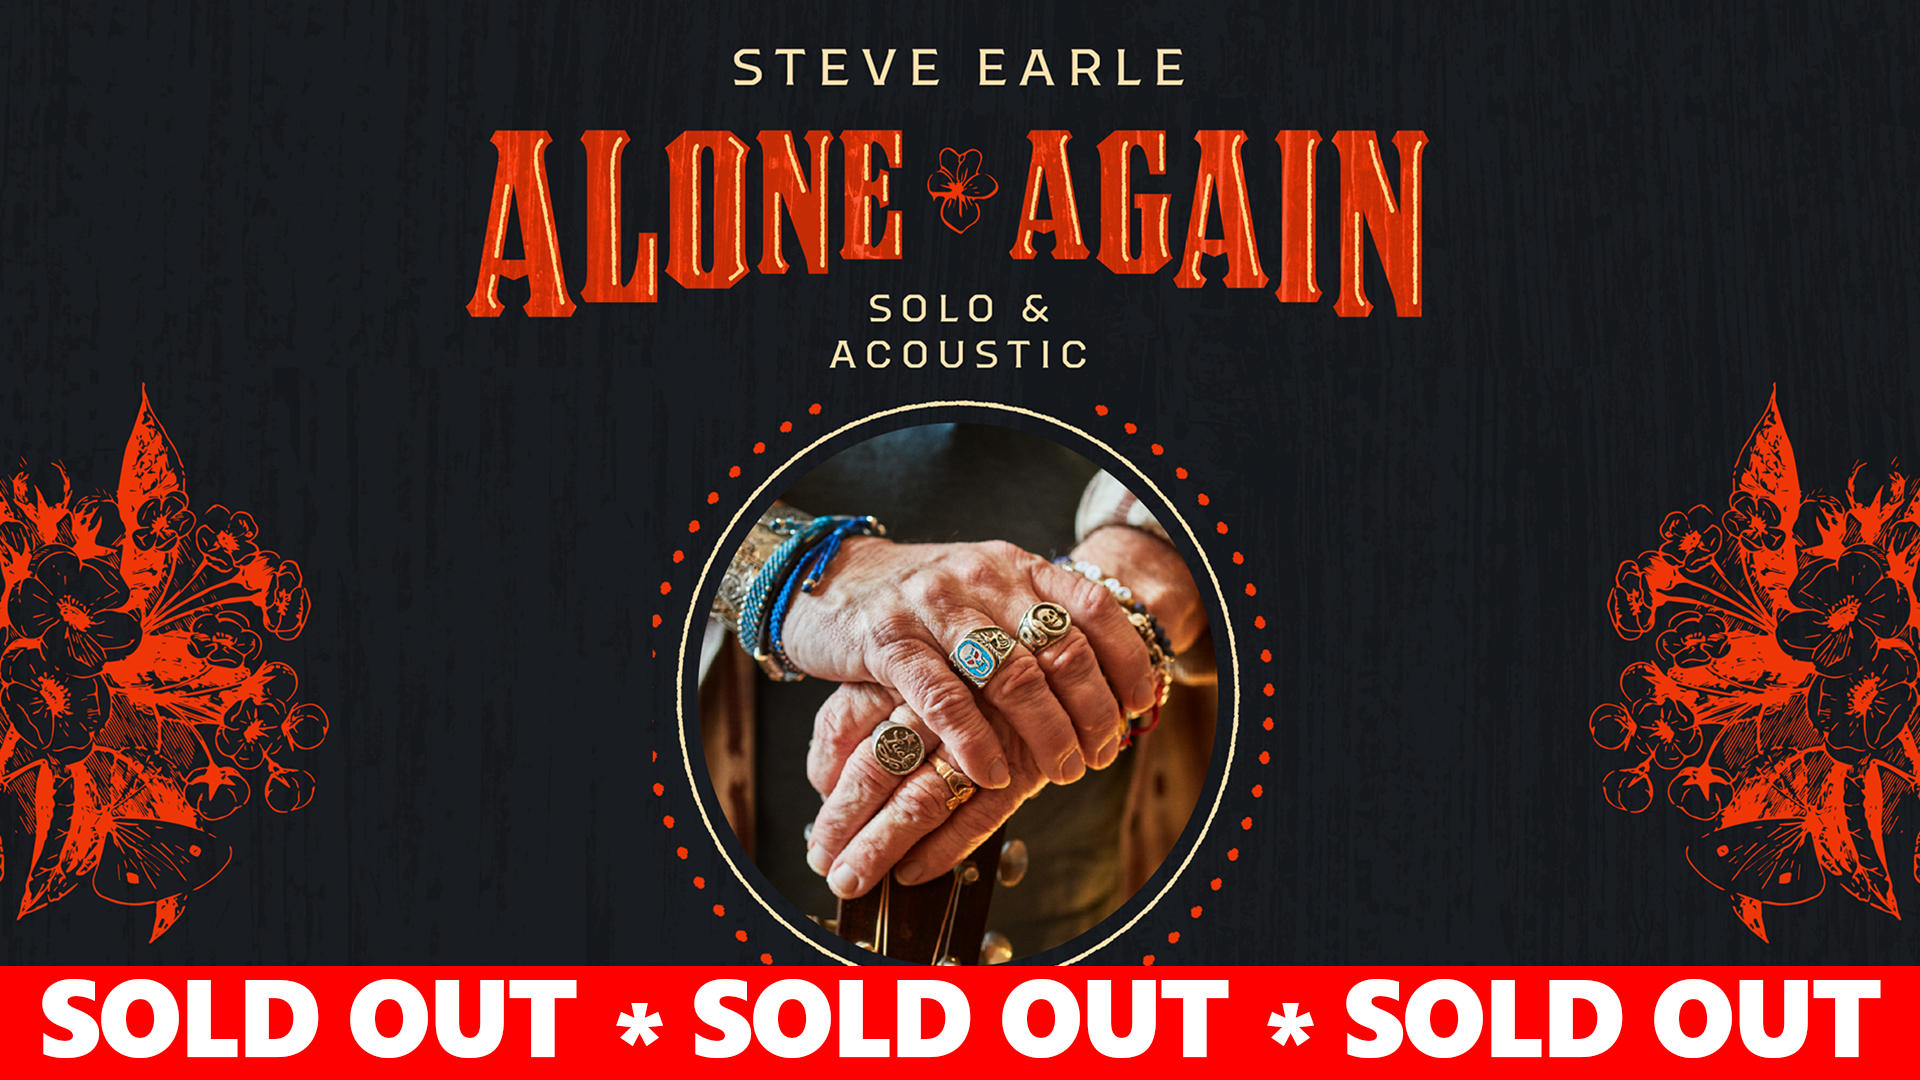 Steve Earle 1920 x 1080 SOLD OUT